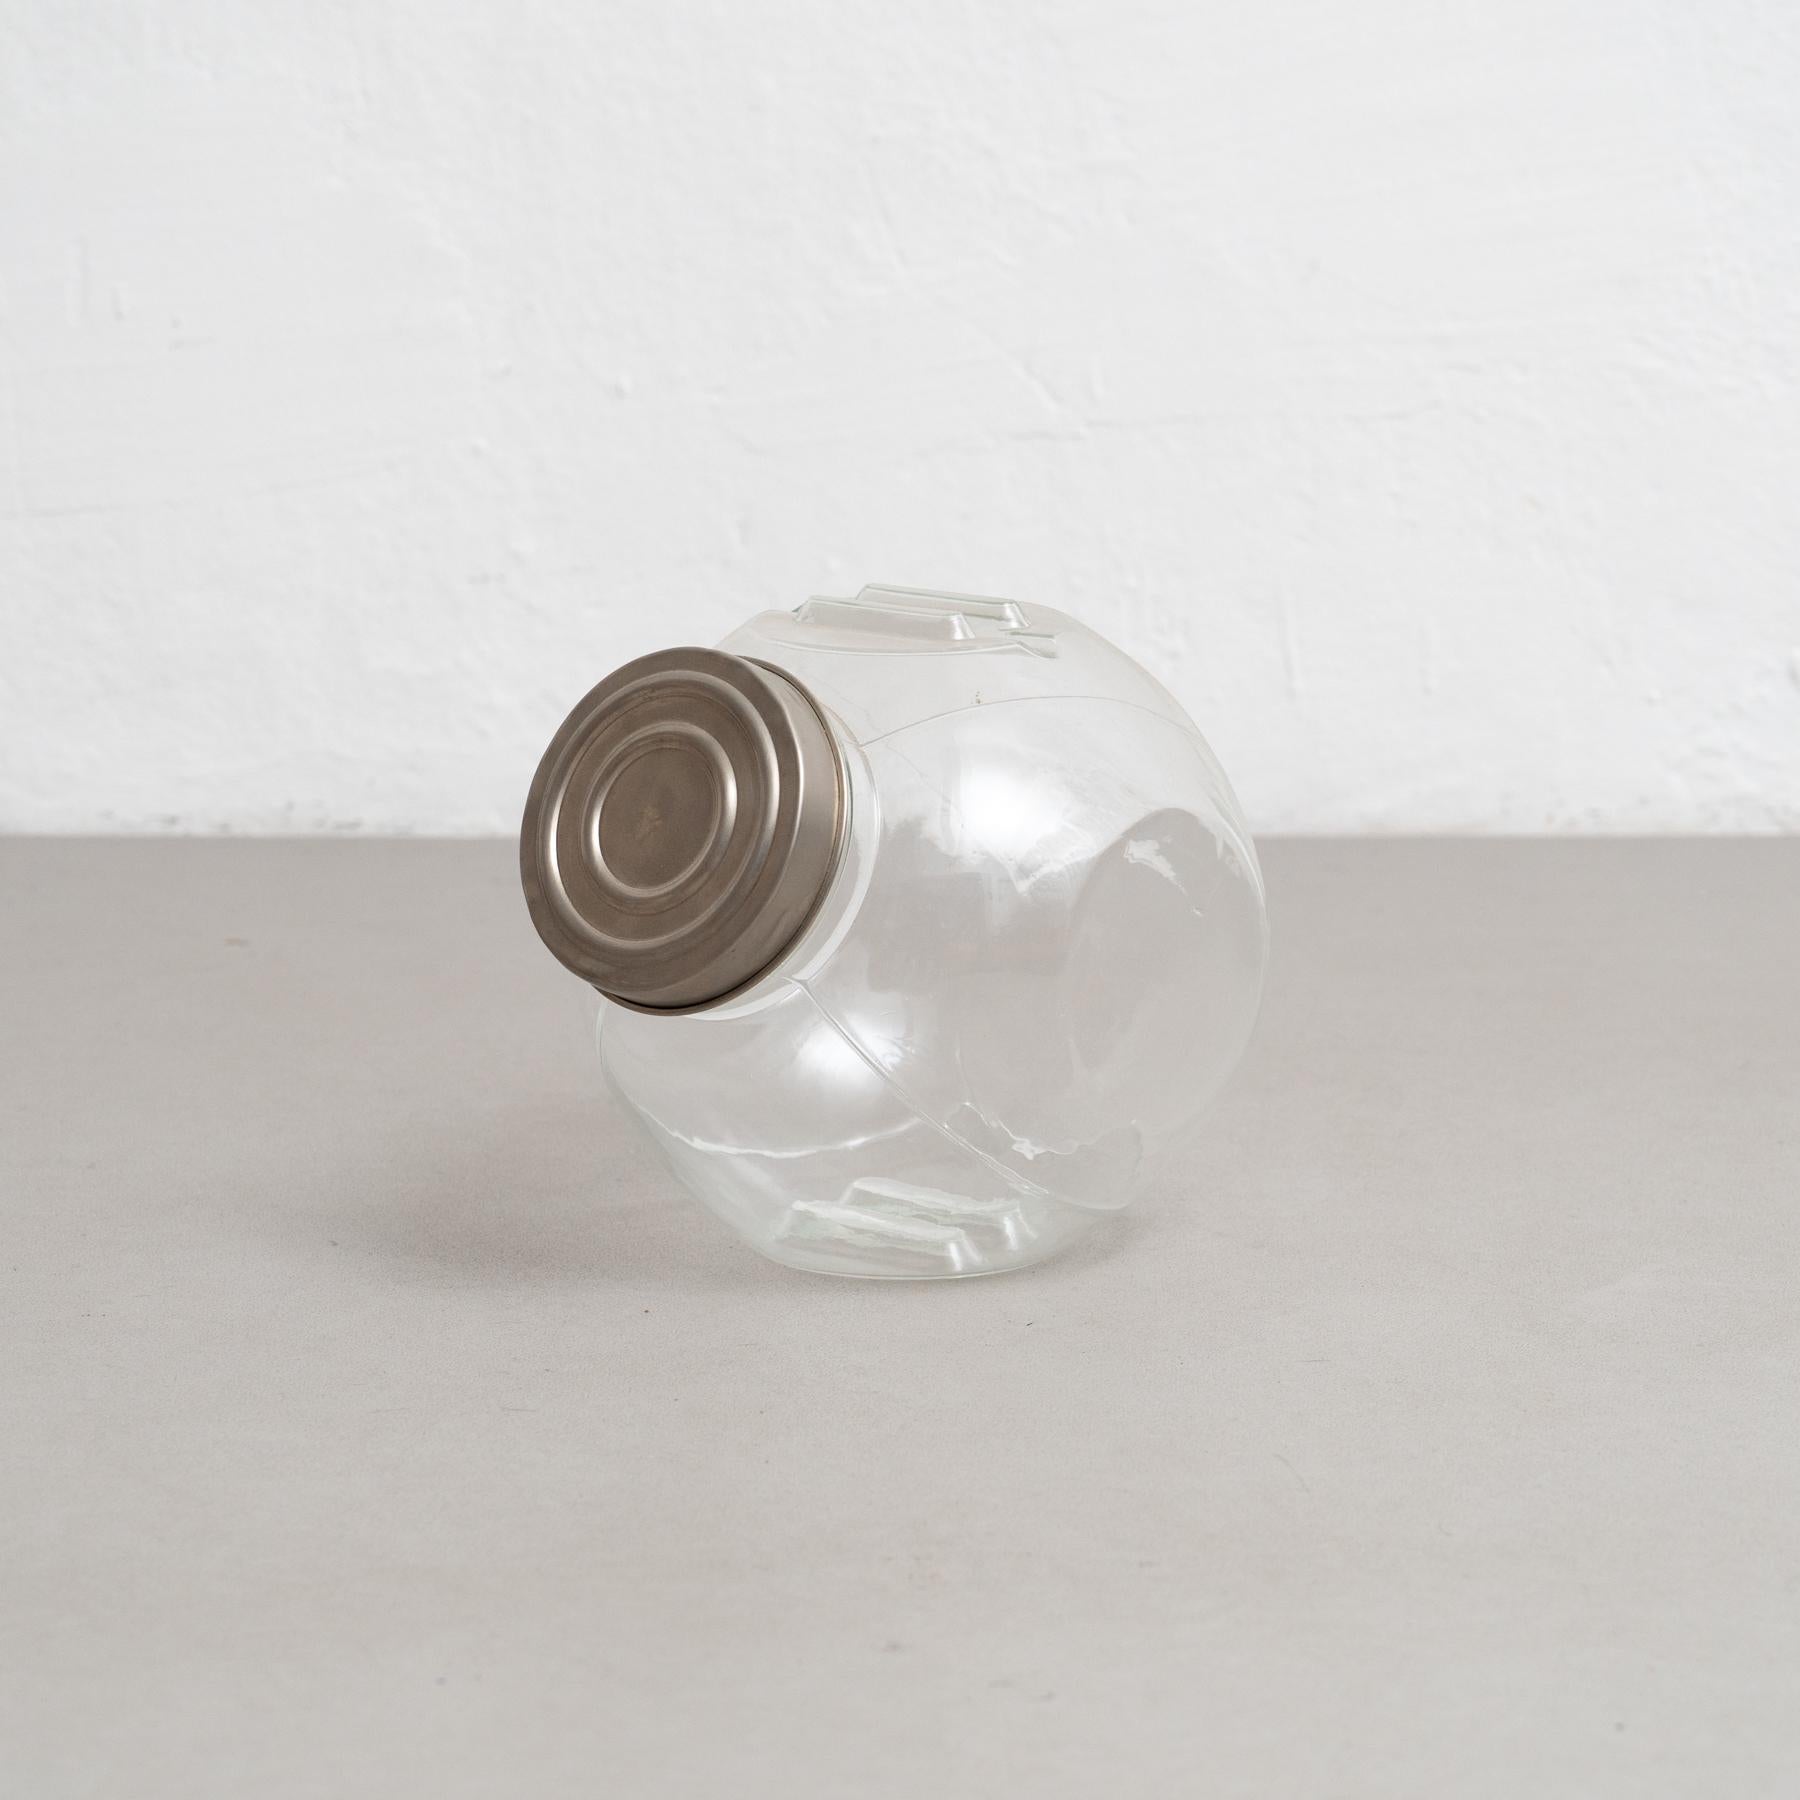 Antique glass container with a metal cap. 

Made by unknown manufacturer in Spain, circa 1930.

In original condition, with minor wear consistent with age and use, preserving a beautiful patina.

Materials:
Glass
Metal.

